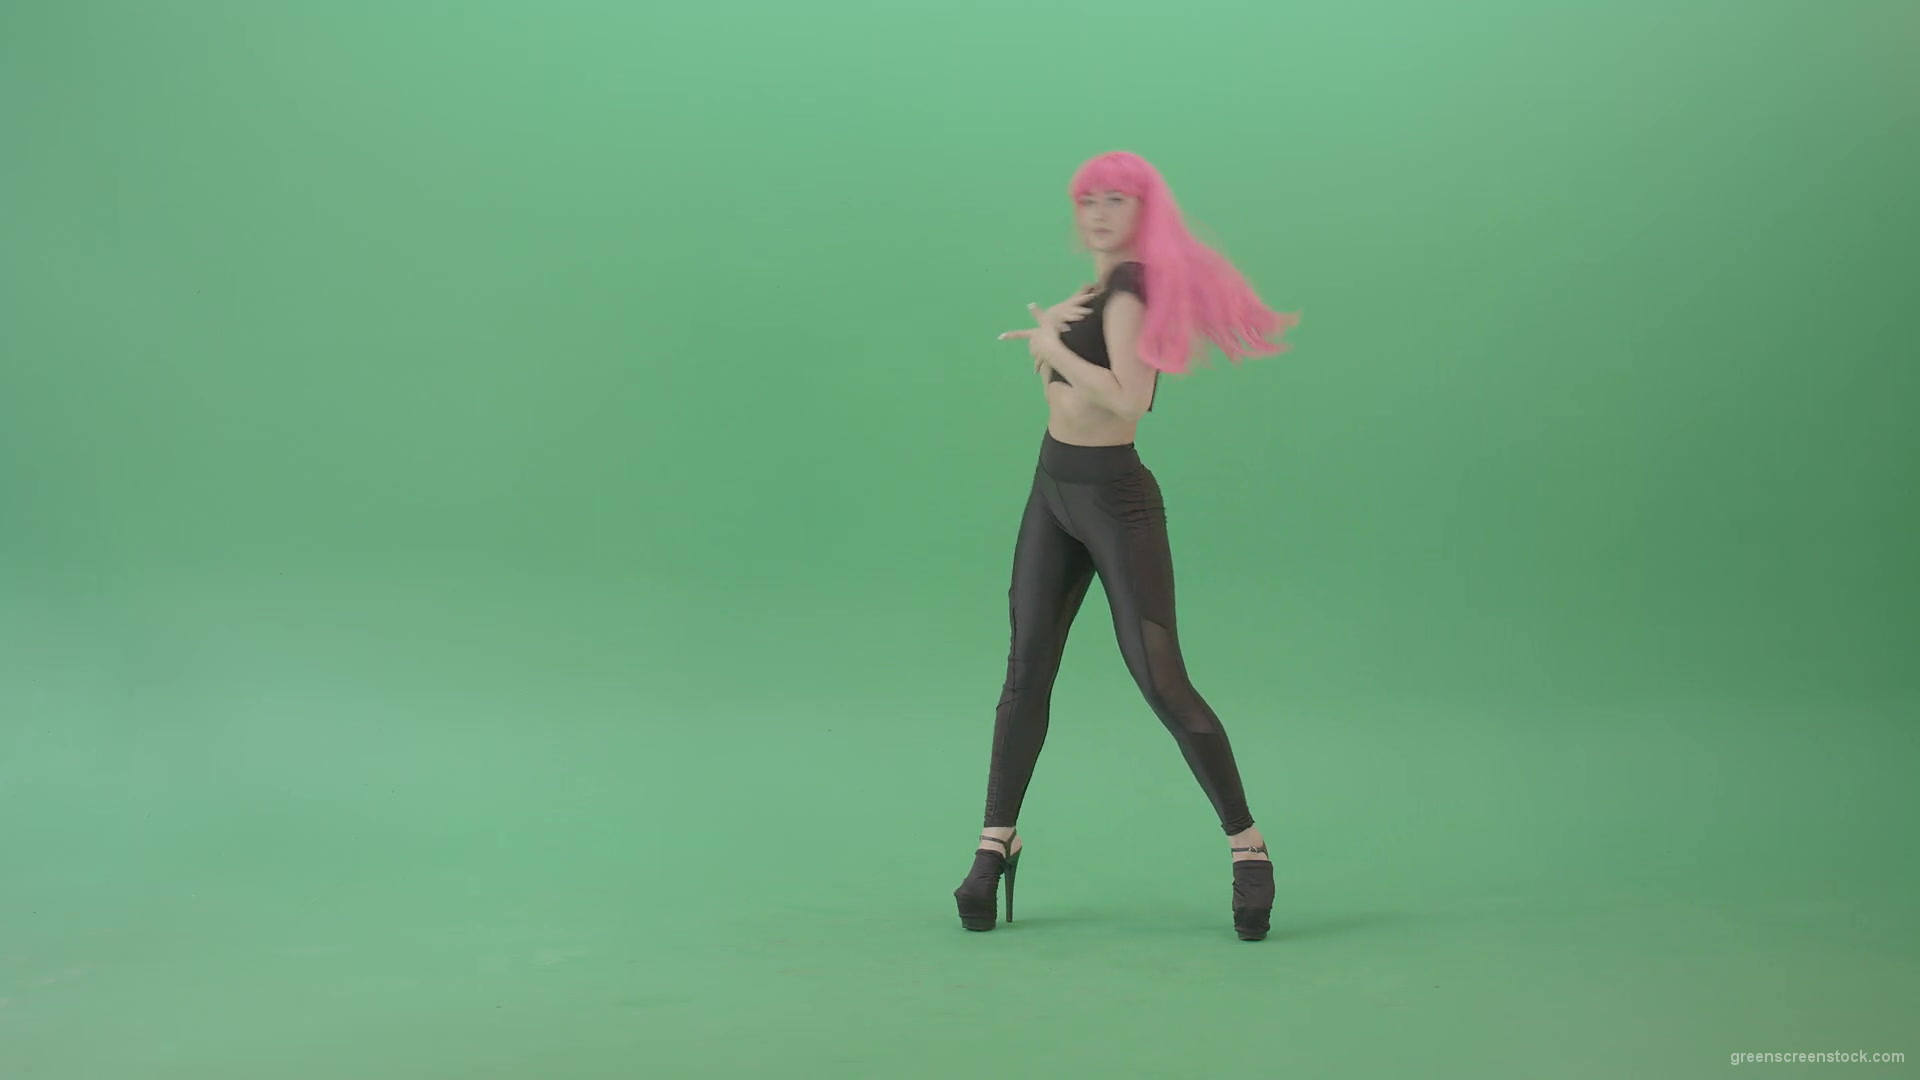 Pink-hair-EMO-sexy-girl-on-green-screen-posing-and-dancing-4K-Video-Footage-1920_007 Green Screen Stock